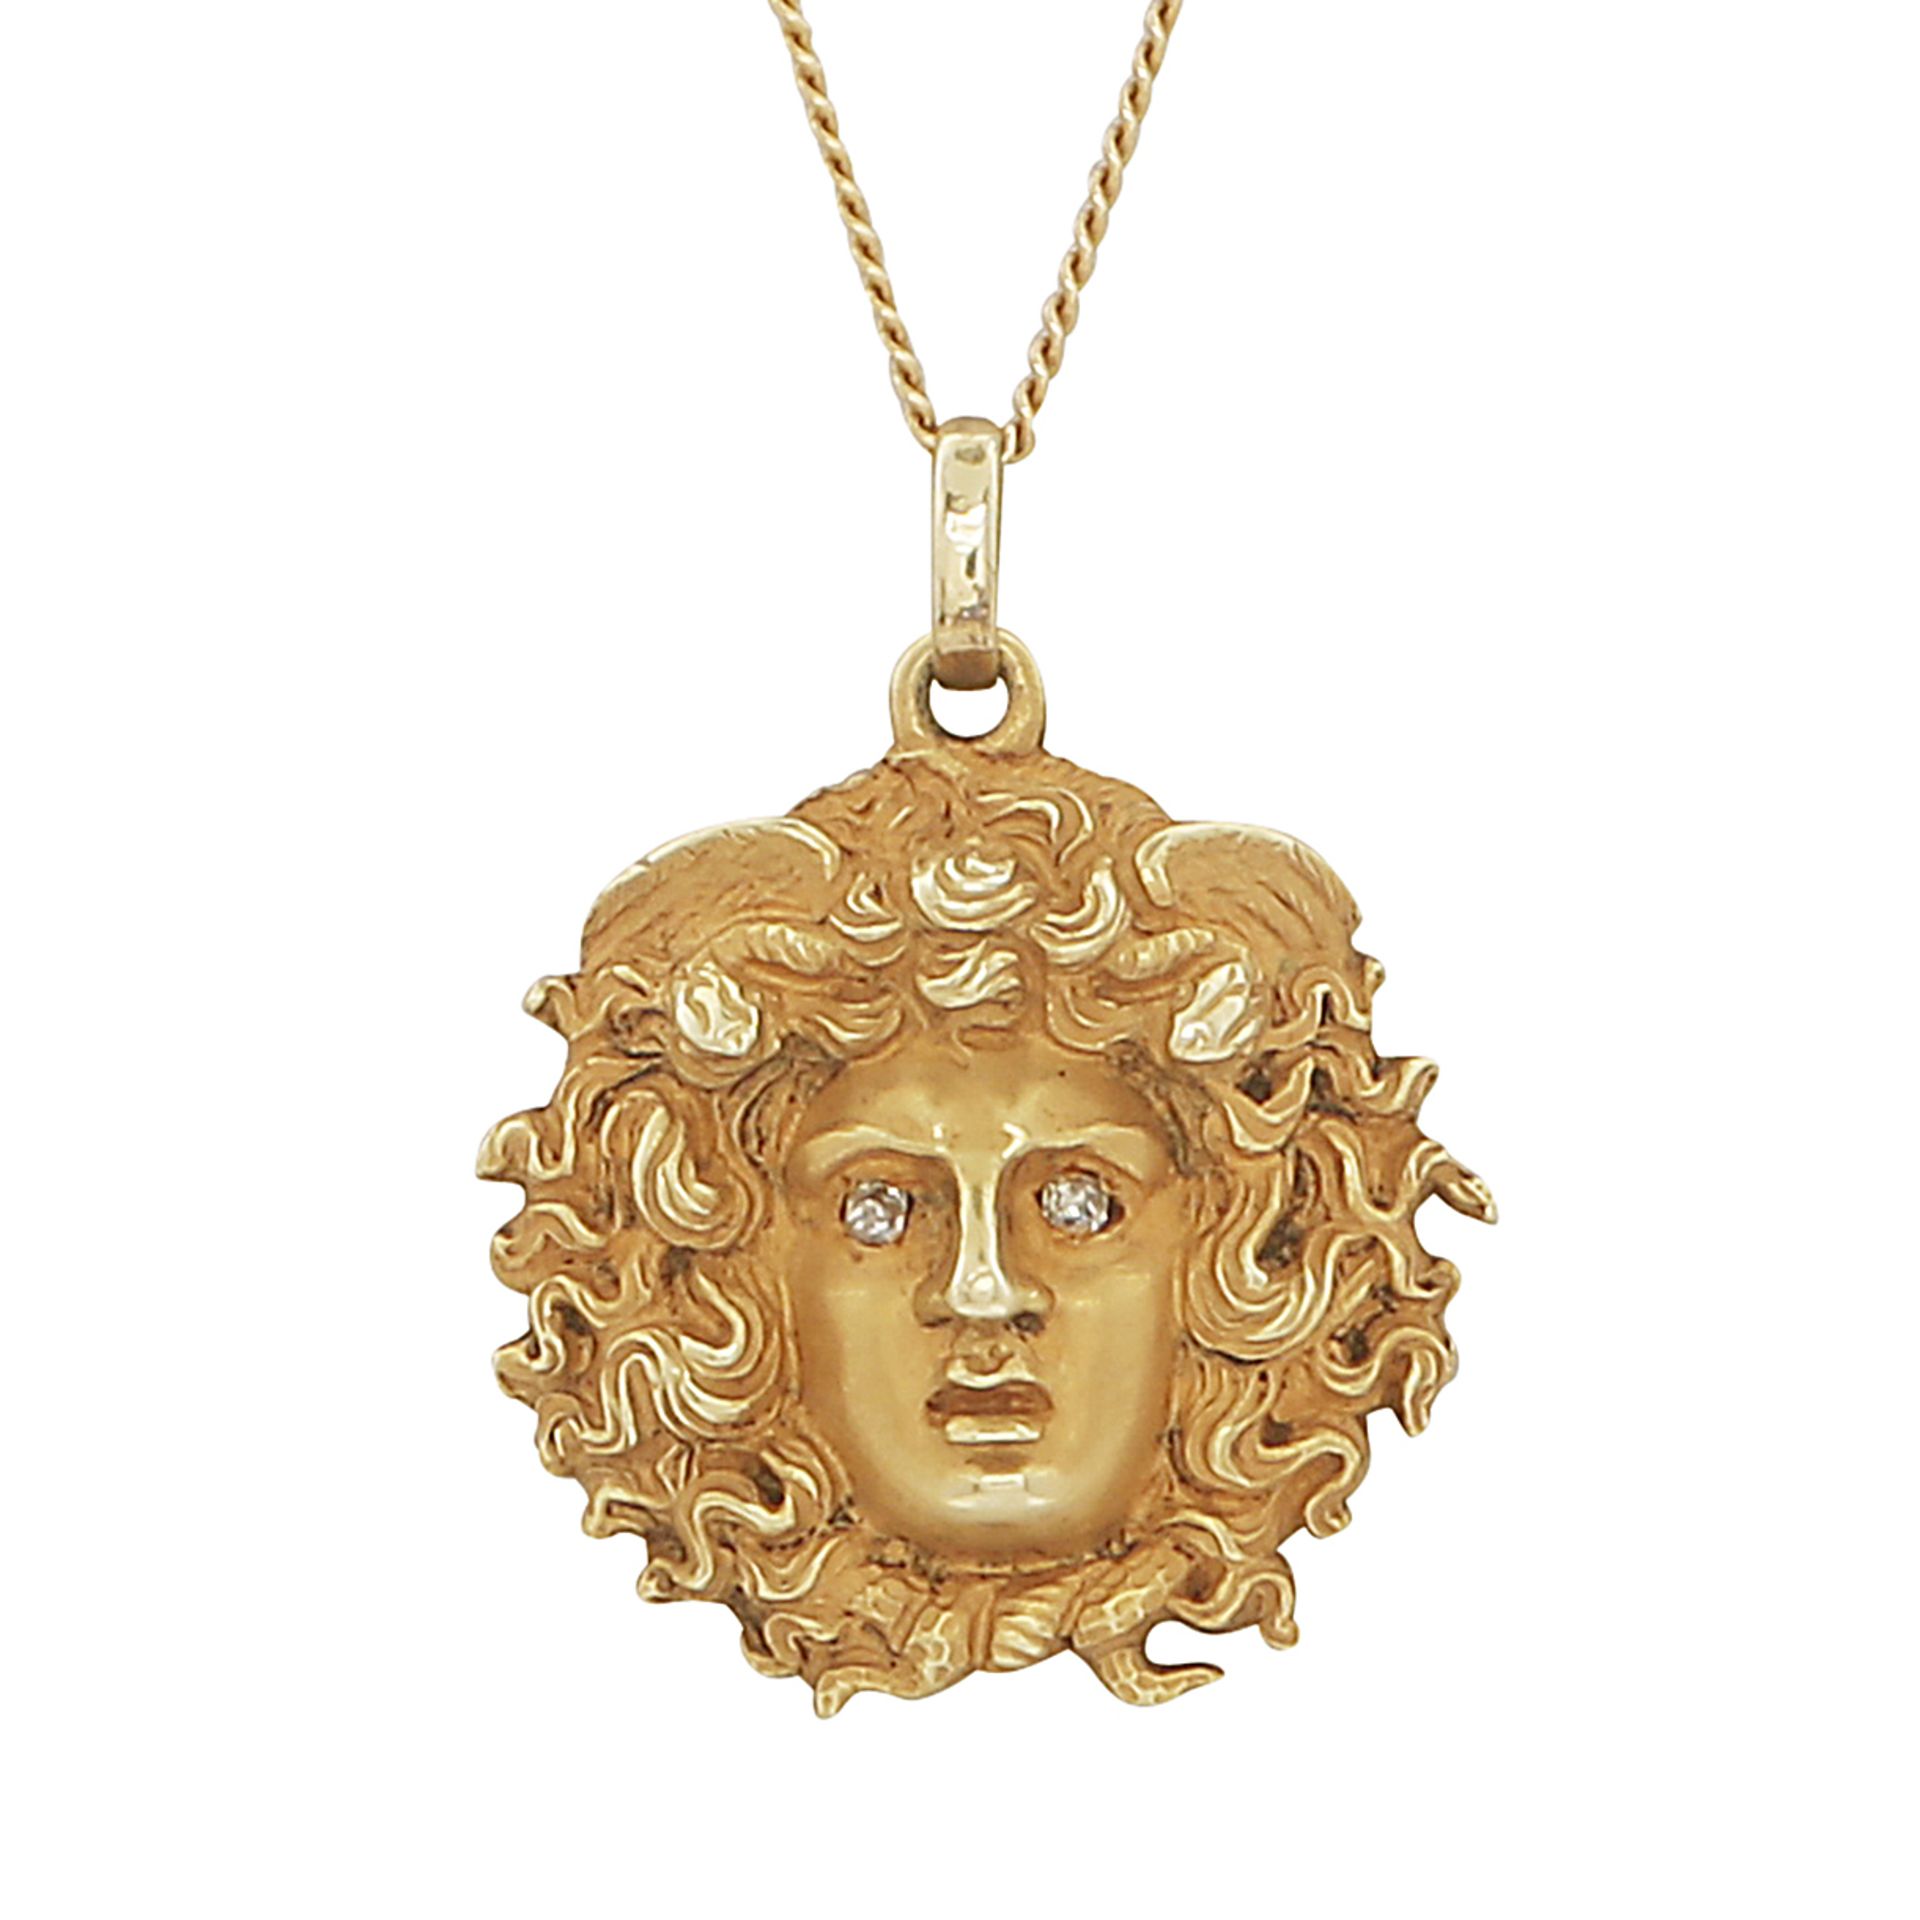 GREEK MYTHOLOGY - An antique jewelled pendant and chain in high carat yellow gold, modeled as the